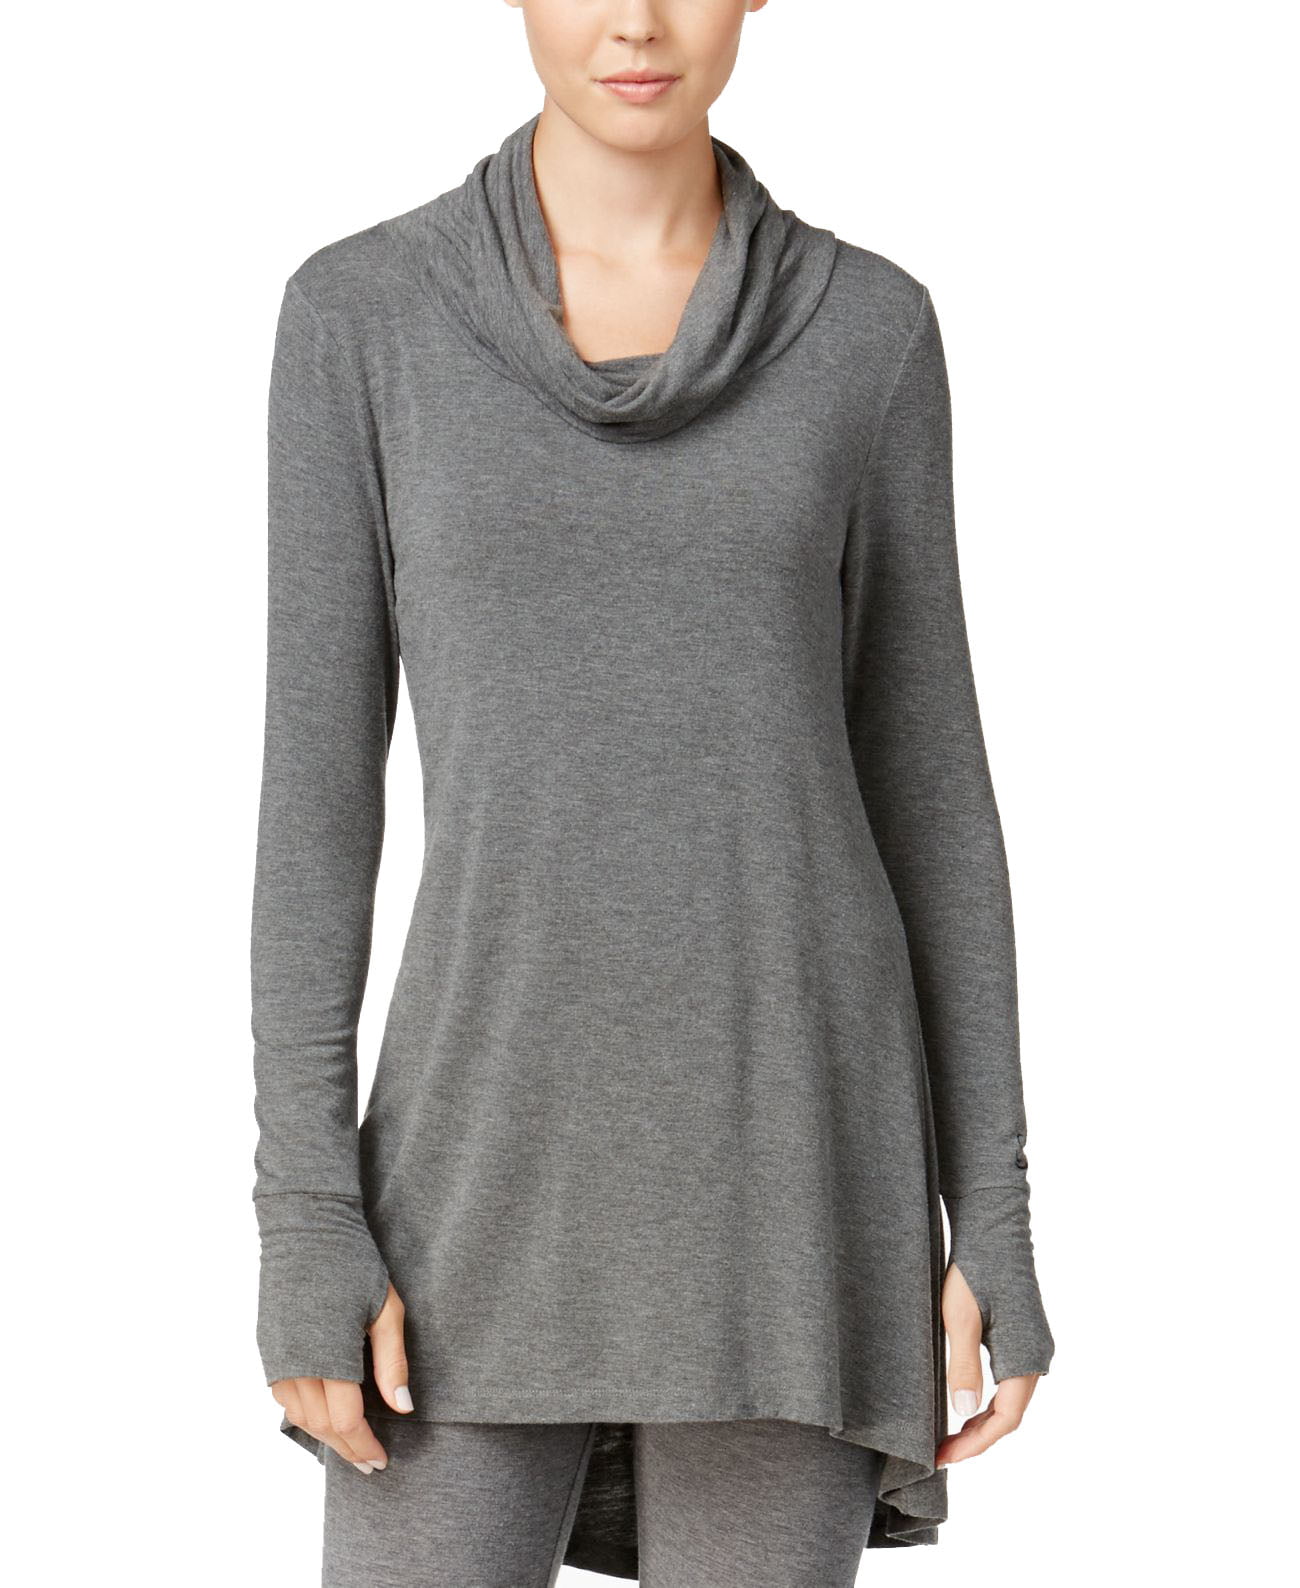 Cuddl Duds Women's Softwear Stretch Cowl-Neck Tunic, Charcoal, Small ...